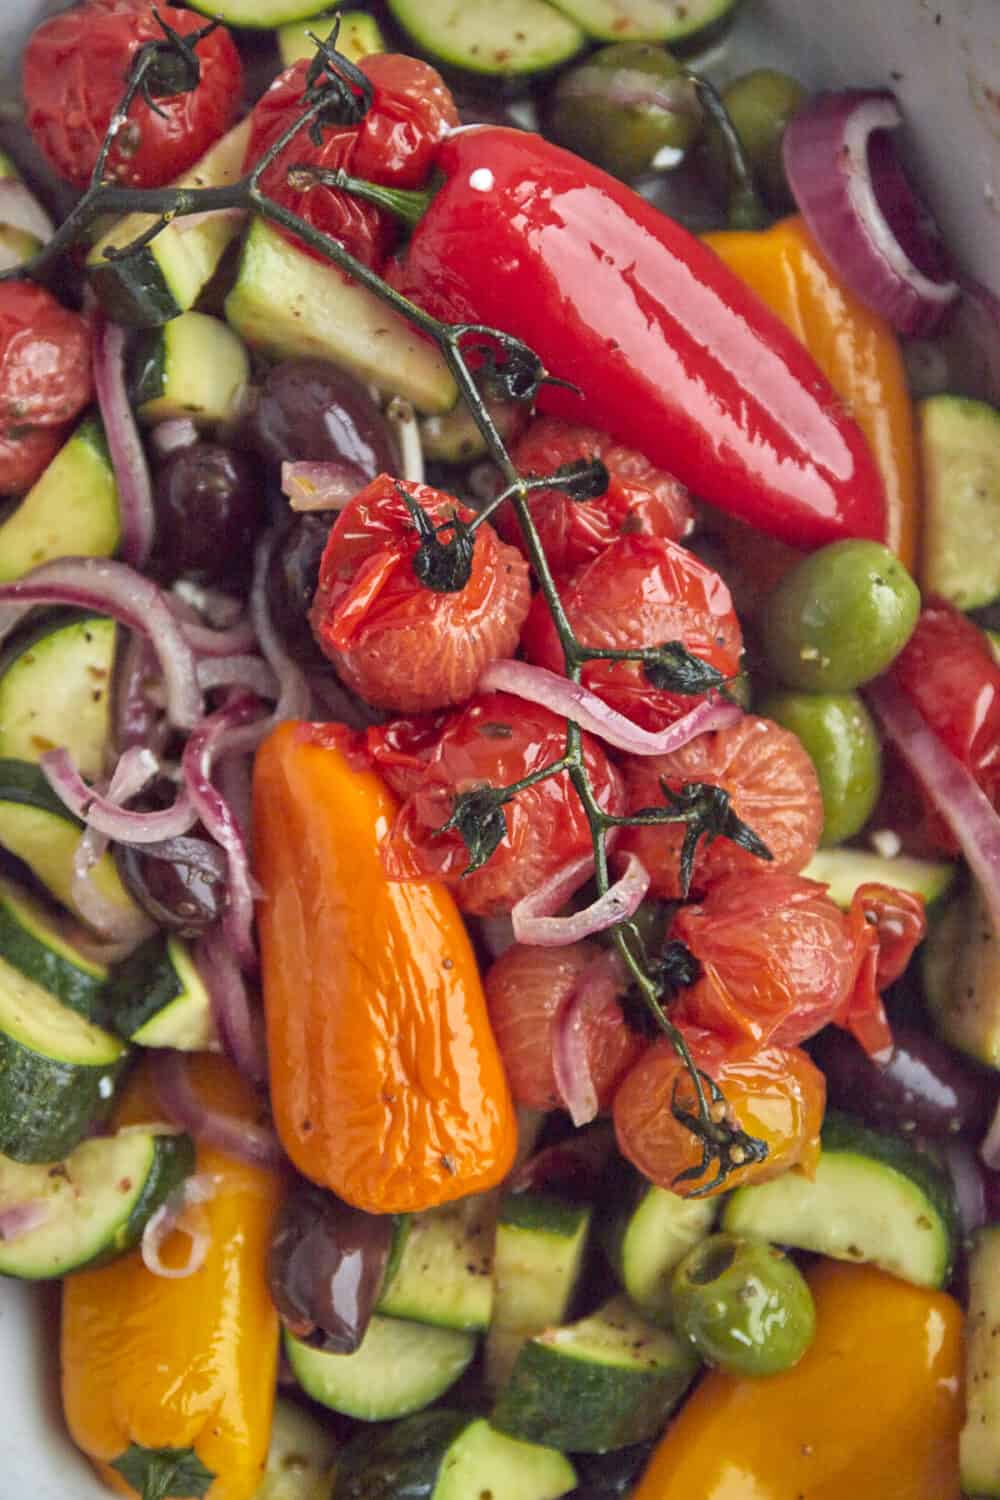 roasted tomatoes, zucchini, bell peppers red onions, and olives